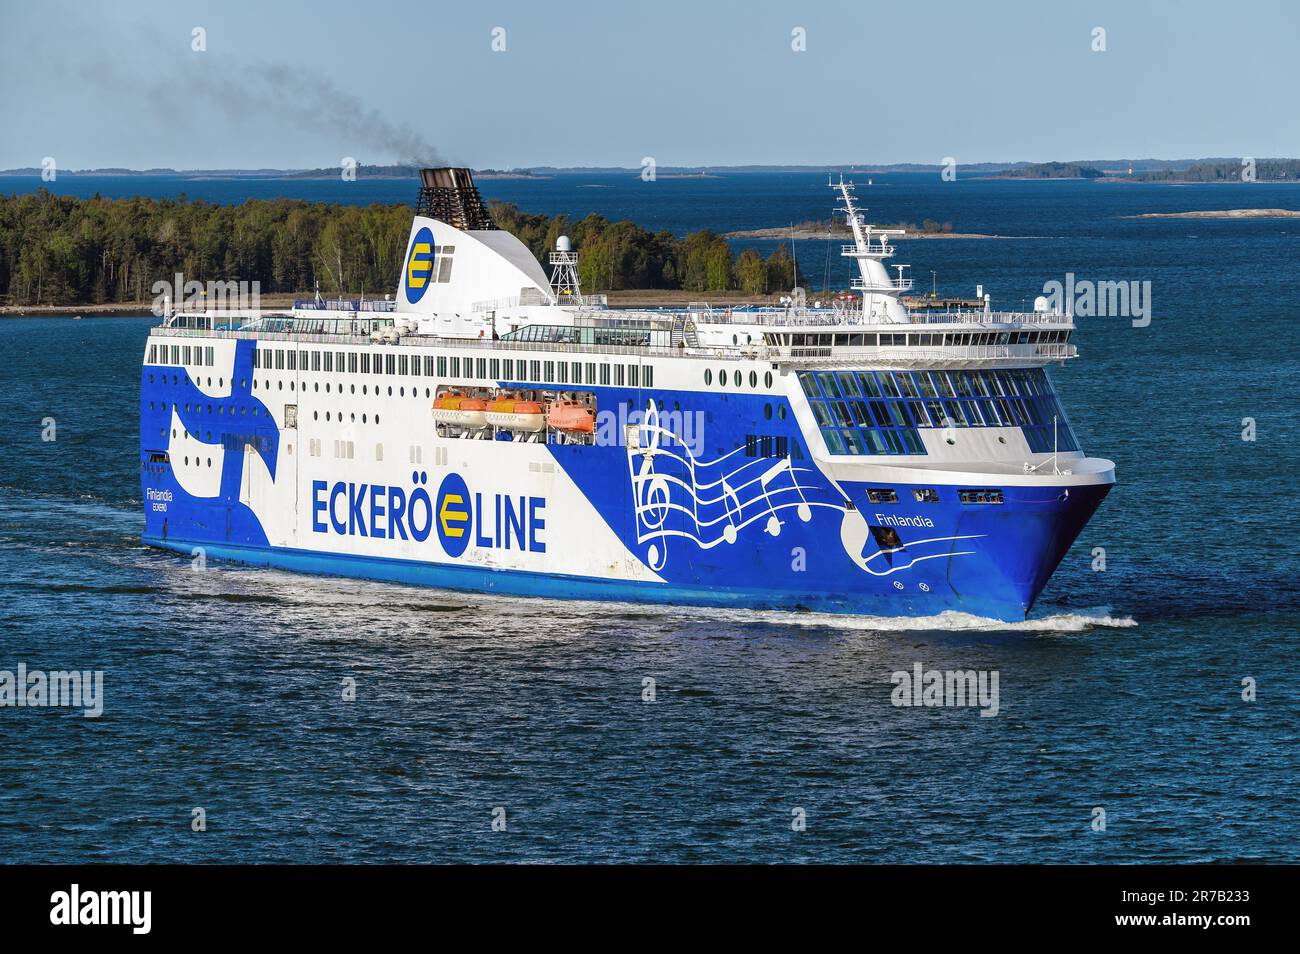 Finlandia is a ferry operated by the Finnish company Eckero Line on the route between Helsinki and Tallinn. Stock Photo